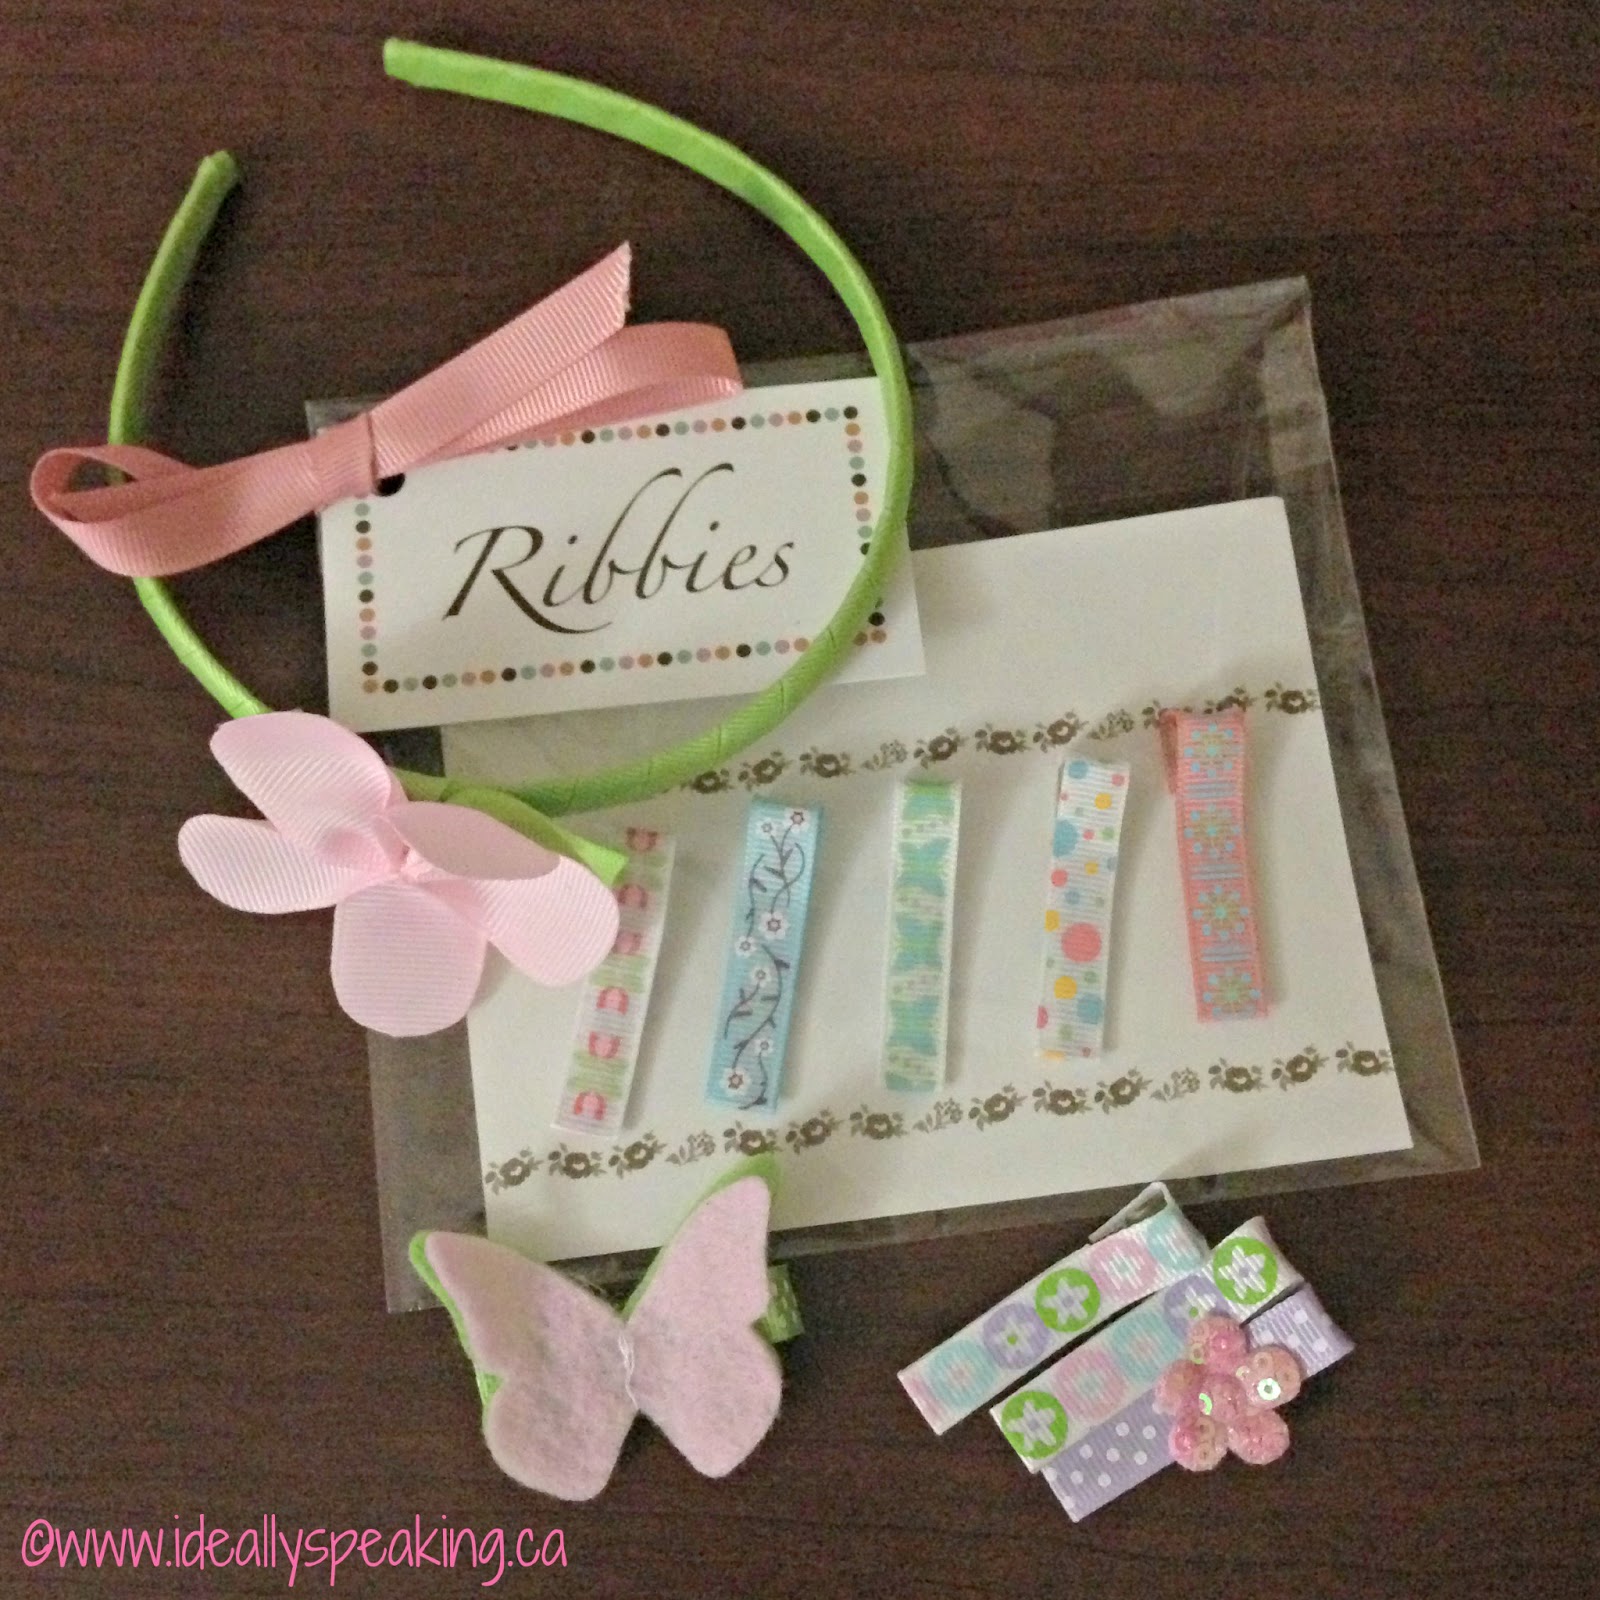 Ribbies Clippies Review - Adorable toddler hair accessories.